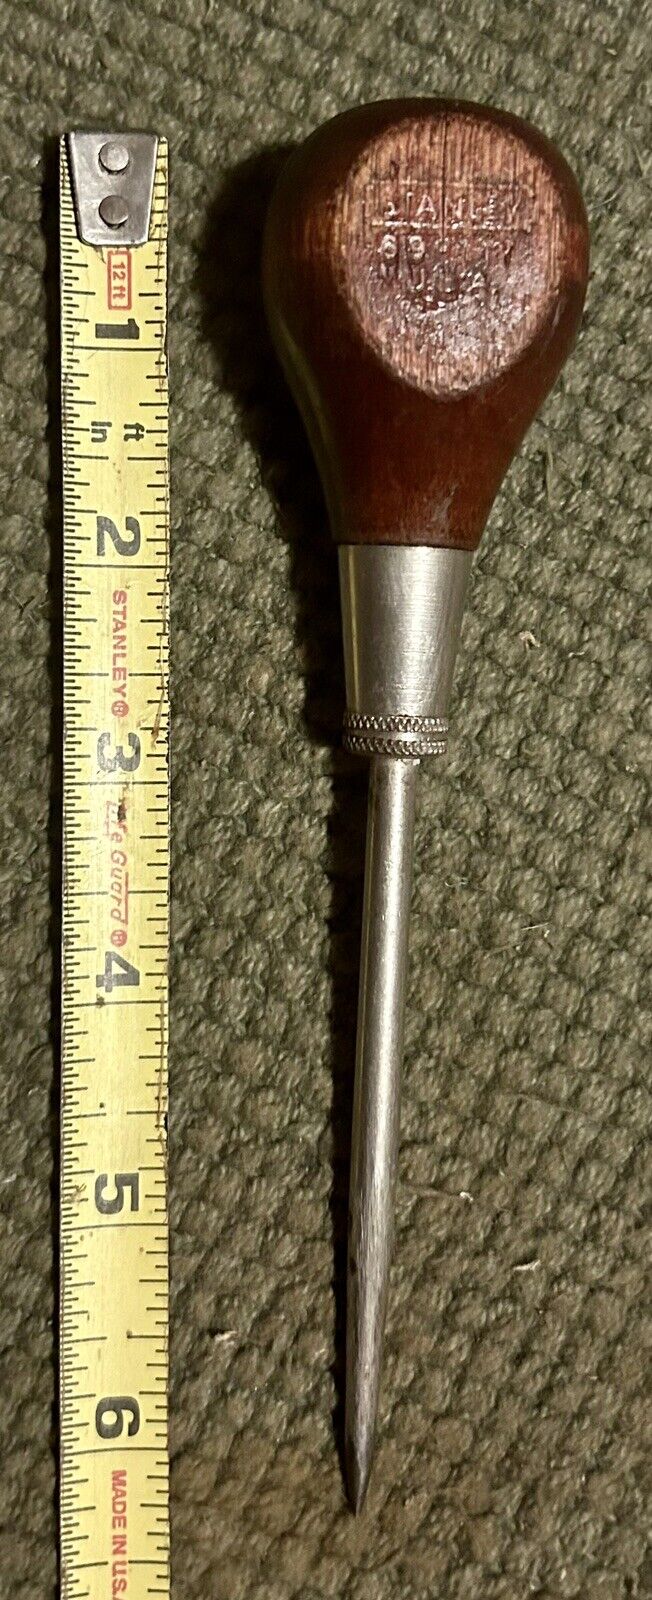 Vintage Stanley No. 69-117 Scratch Awl Wooden Handle Hole Punch USA